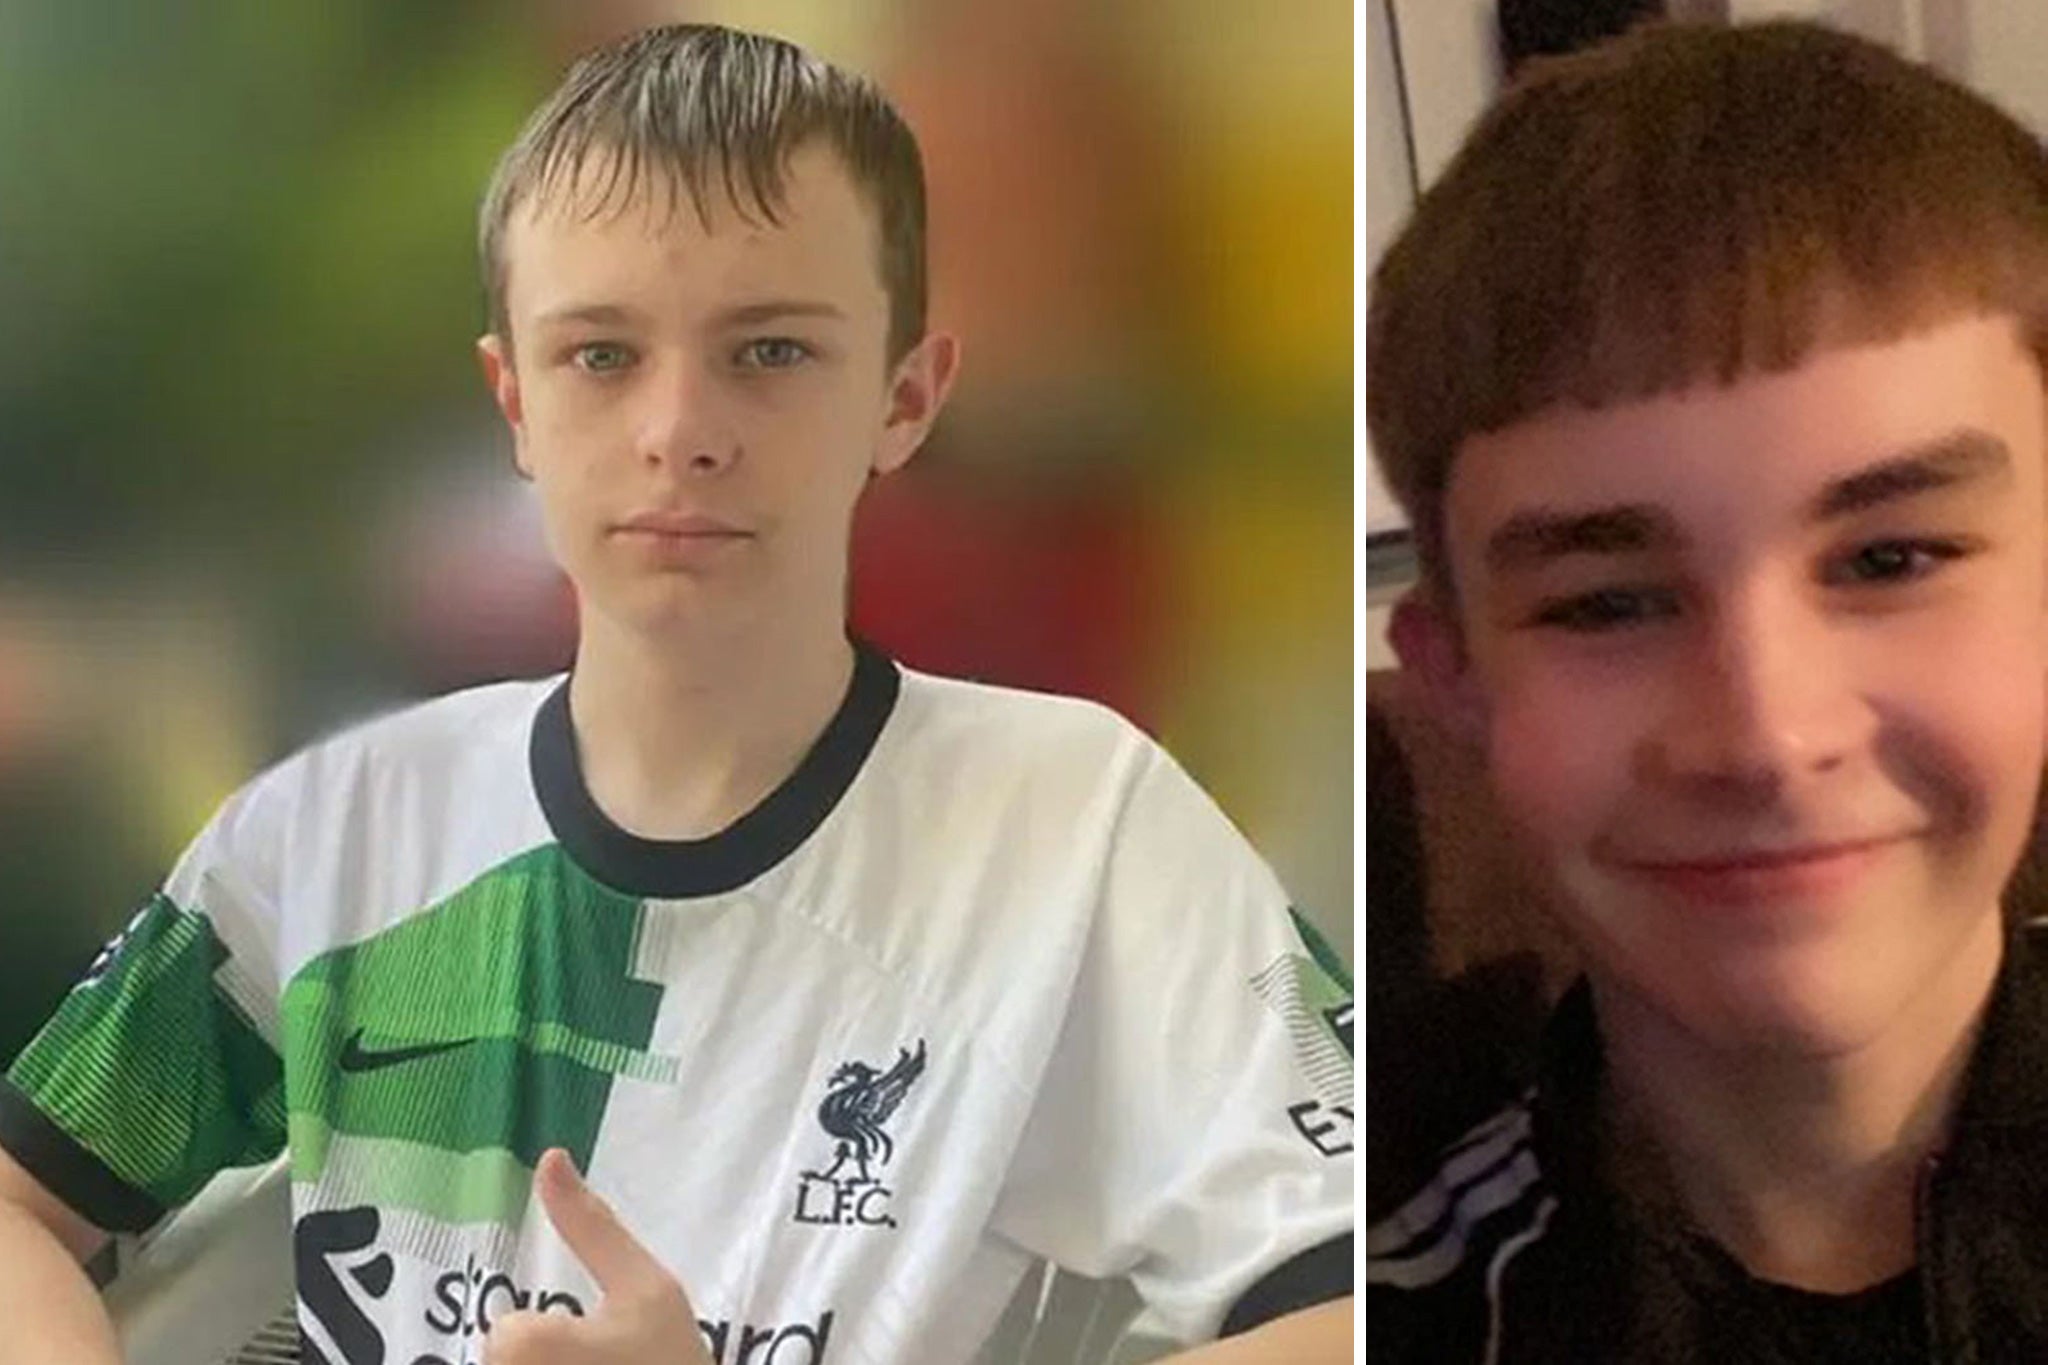 Mason Rist, 15, and Max Dixon, 16, were killed in another area of the city